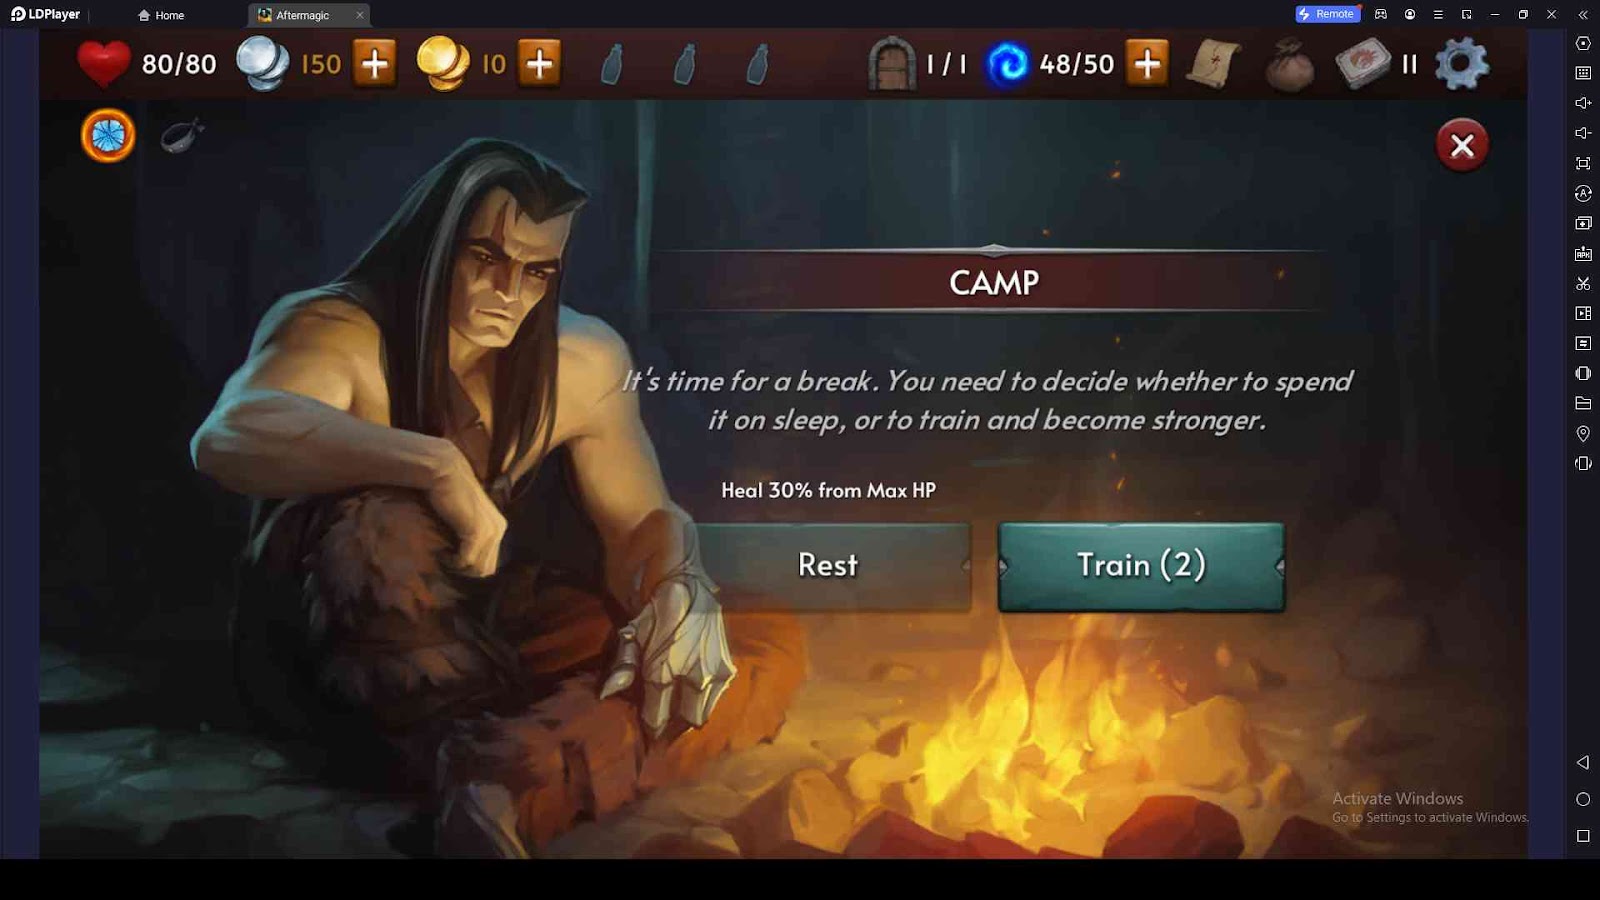 Take Advantages of Camps